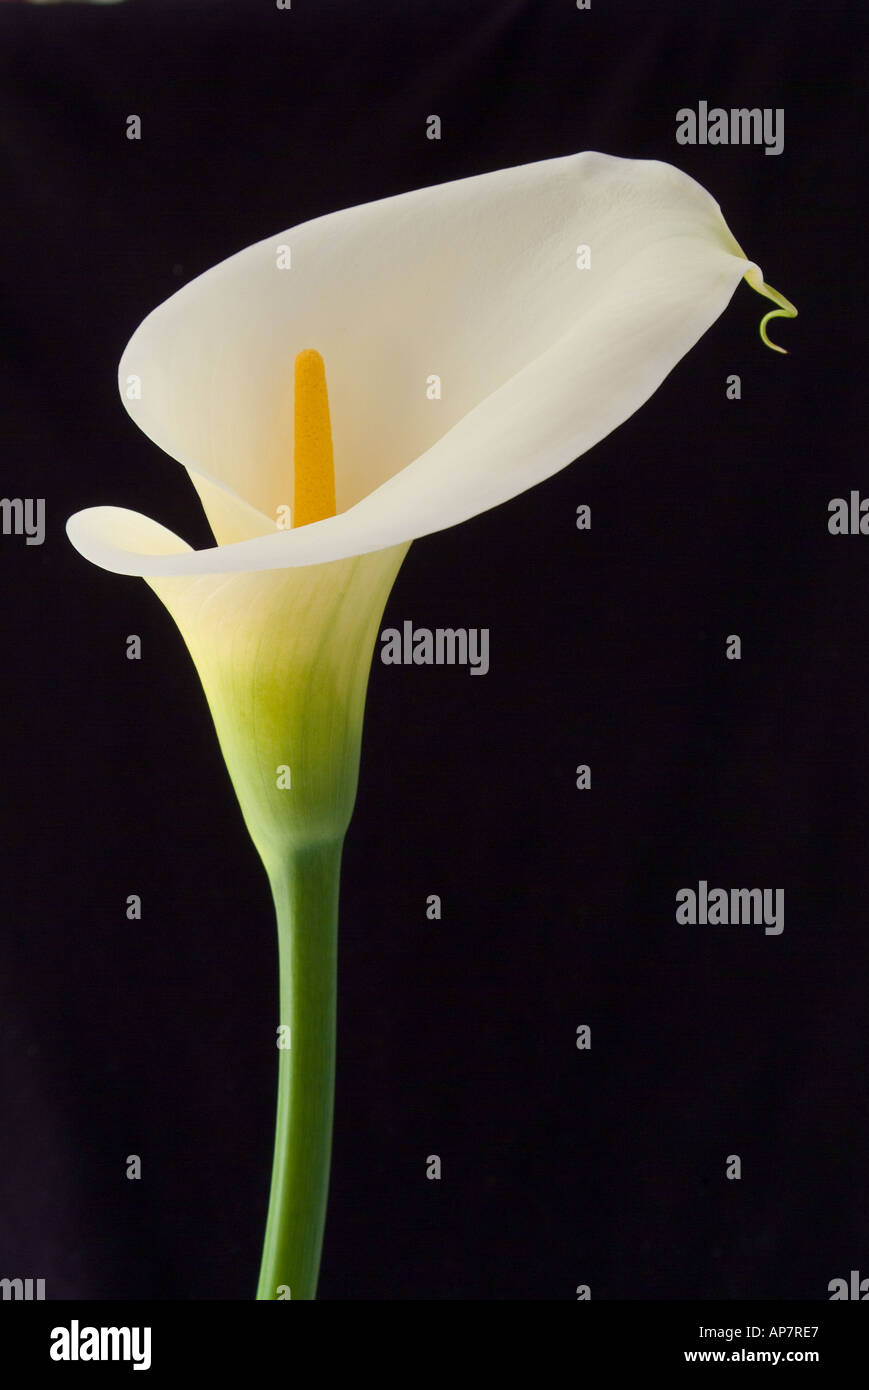 Zantedeschia aethiopica, arum lilies also known as call lillies are a toxic plant that contains calcium oxalate, considered to be an invasive weed. Stock Photo